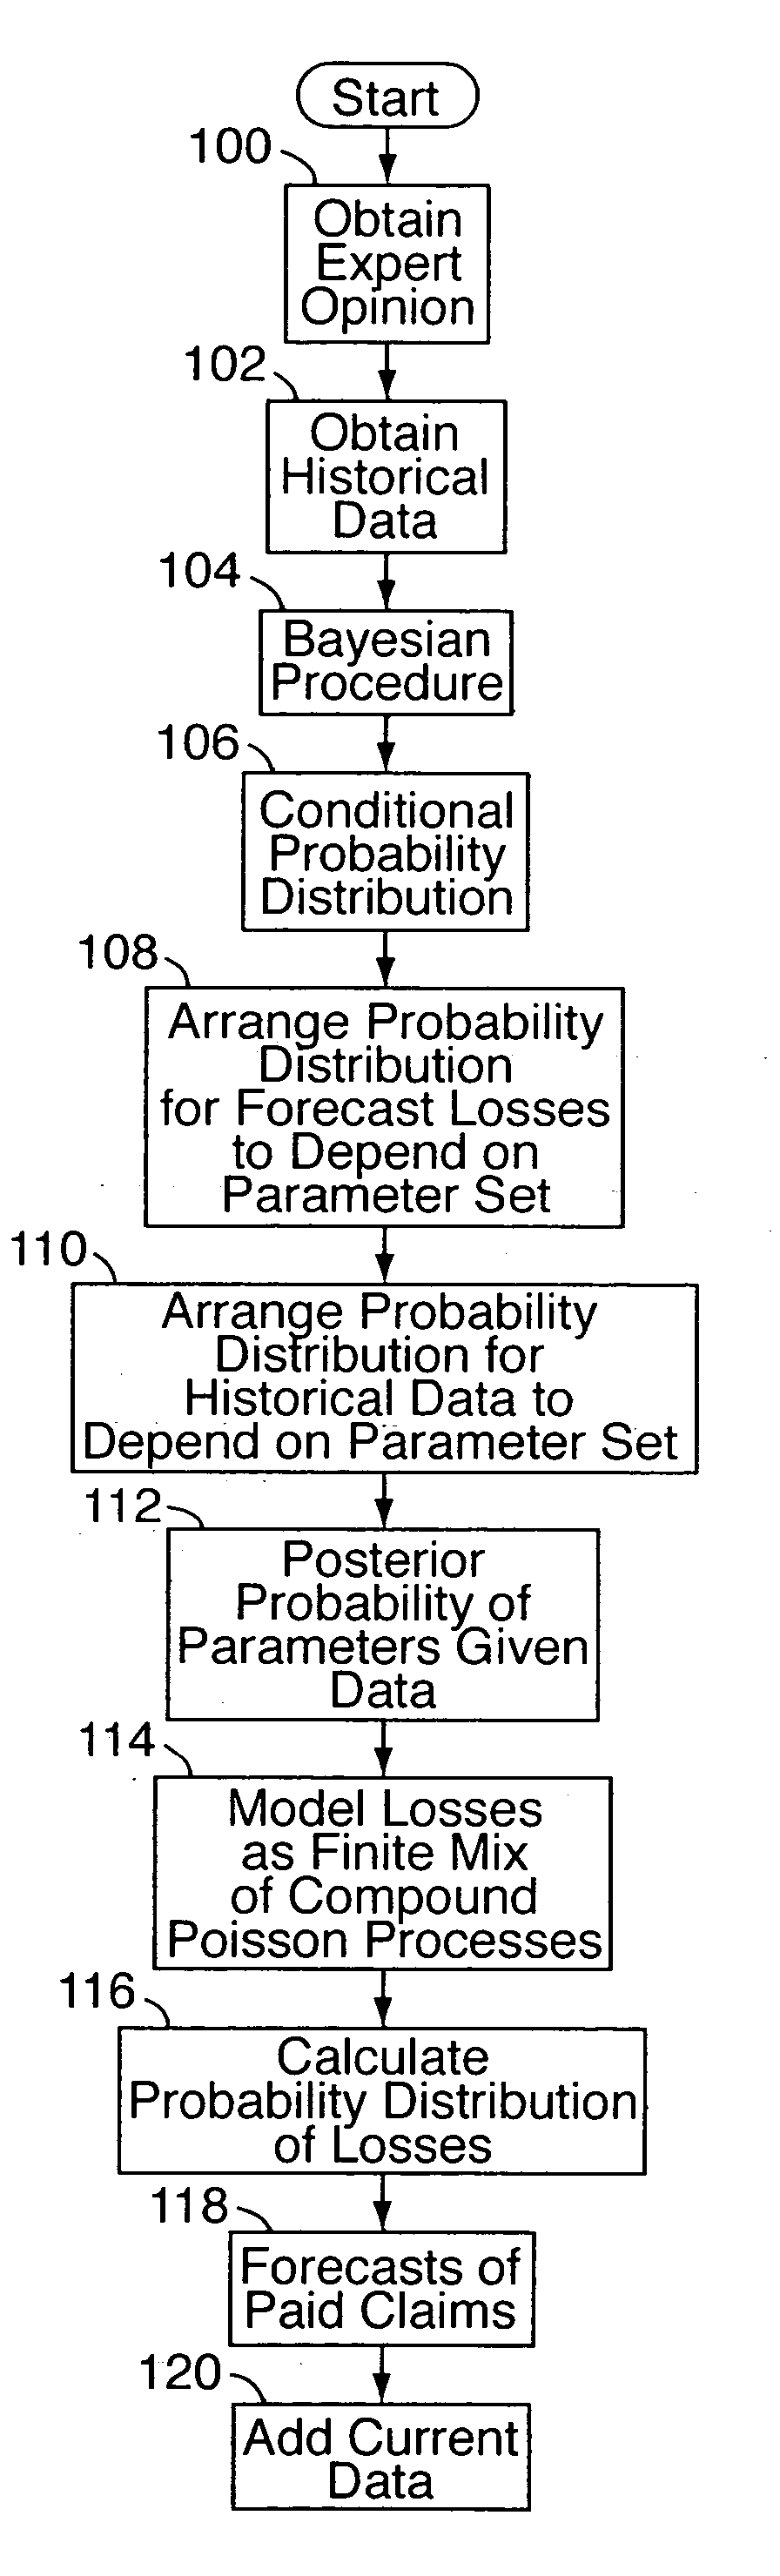 Method of determining prior net benefit of obtaining additional risk data for insurance purposes via survey or other procedure